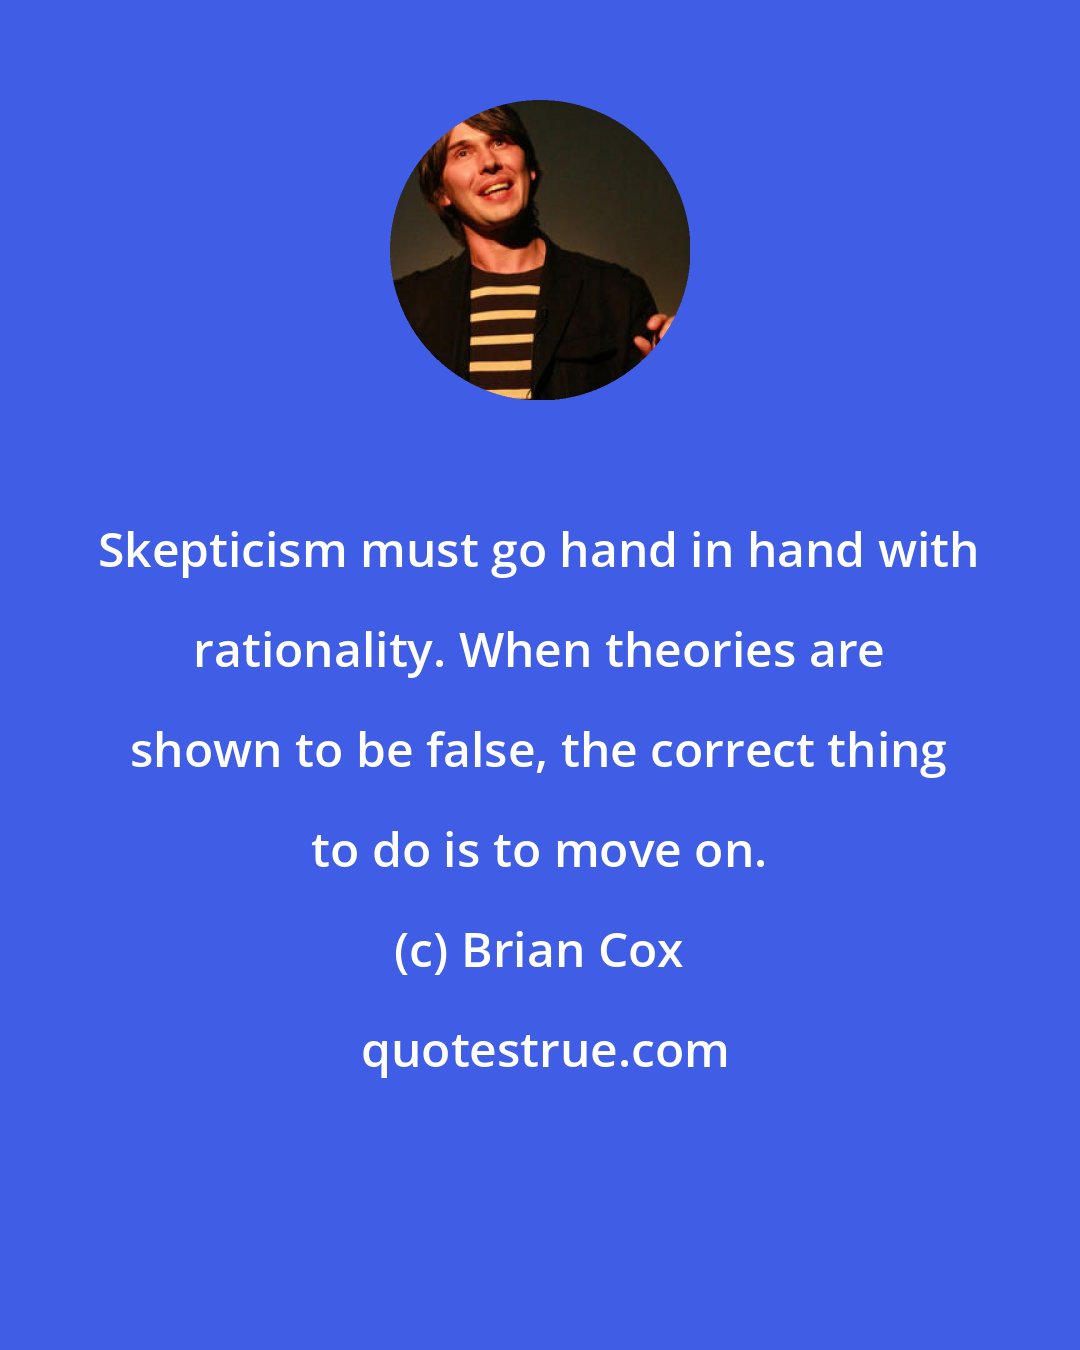 Brian Cox: Skepticism must go hand in hand with rationality. When theories are shown to be false, the correct thing to do is to move on.